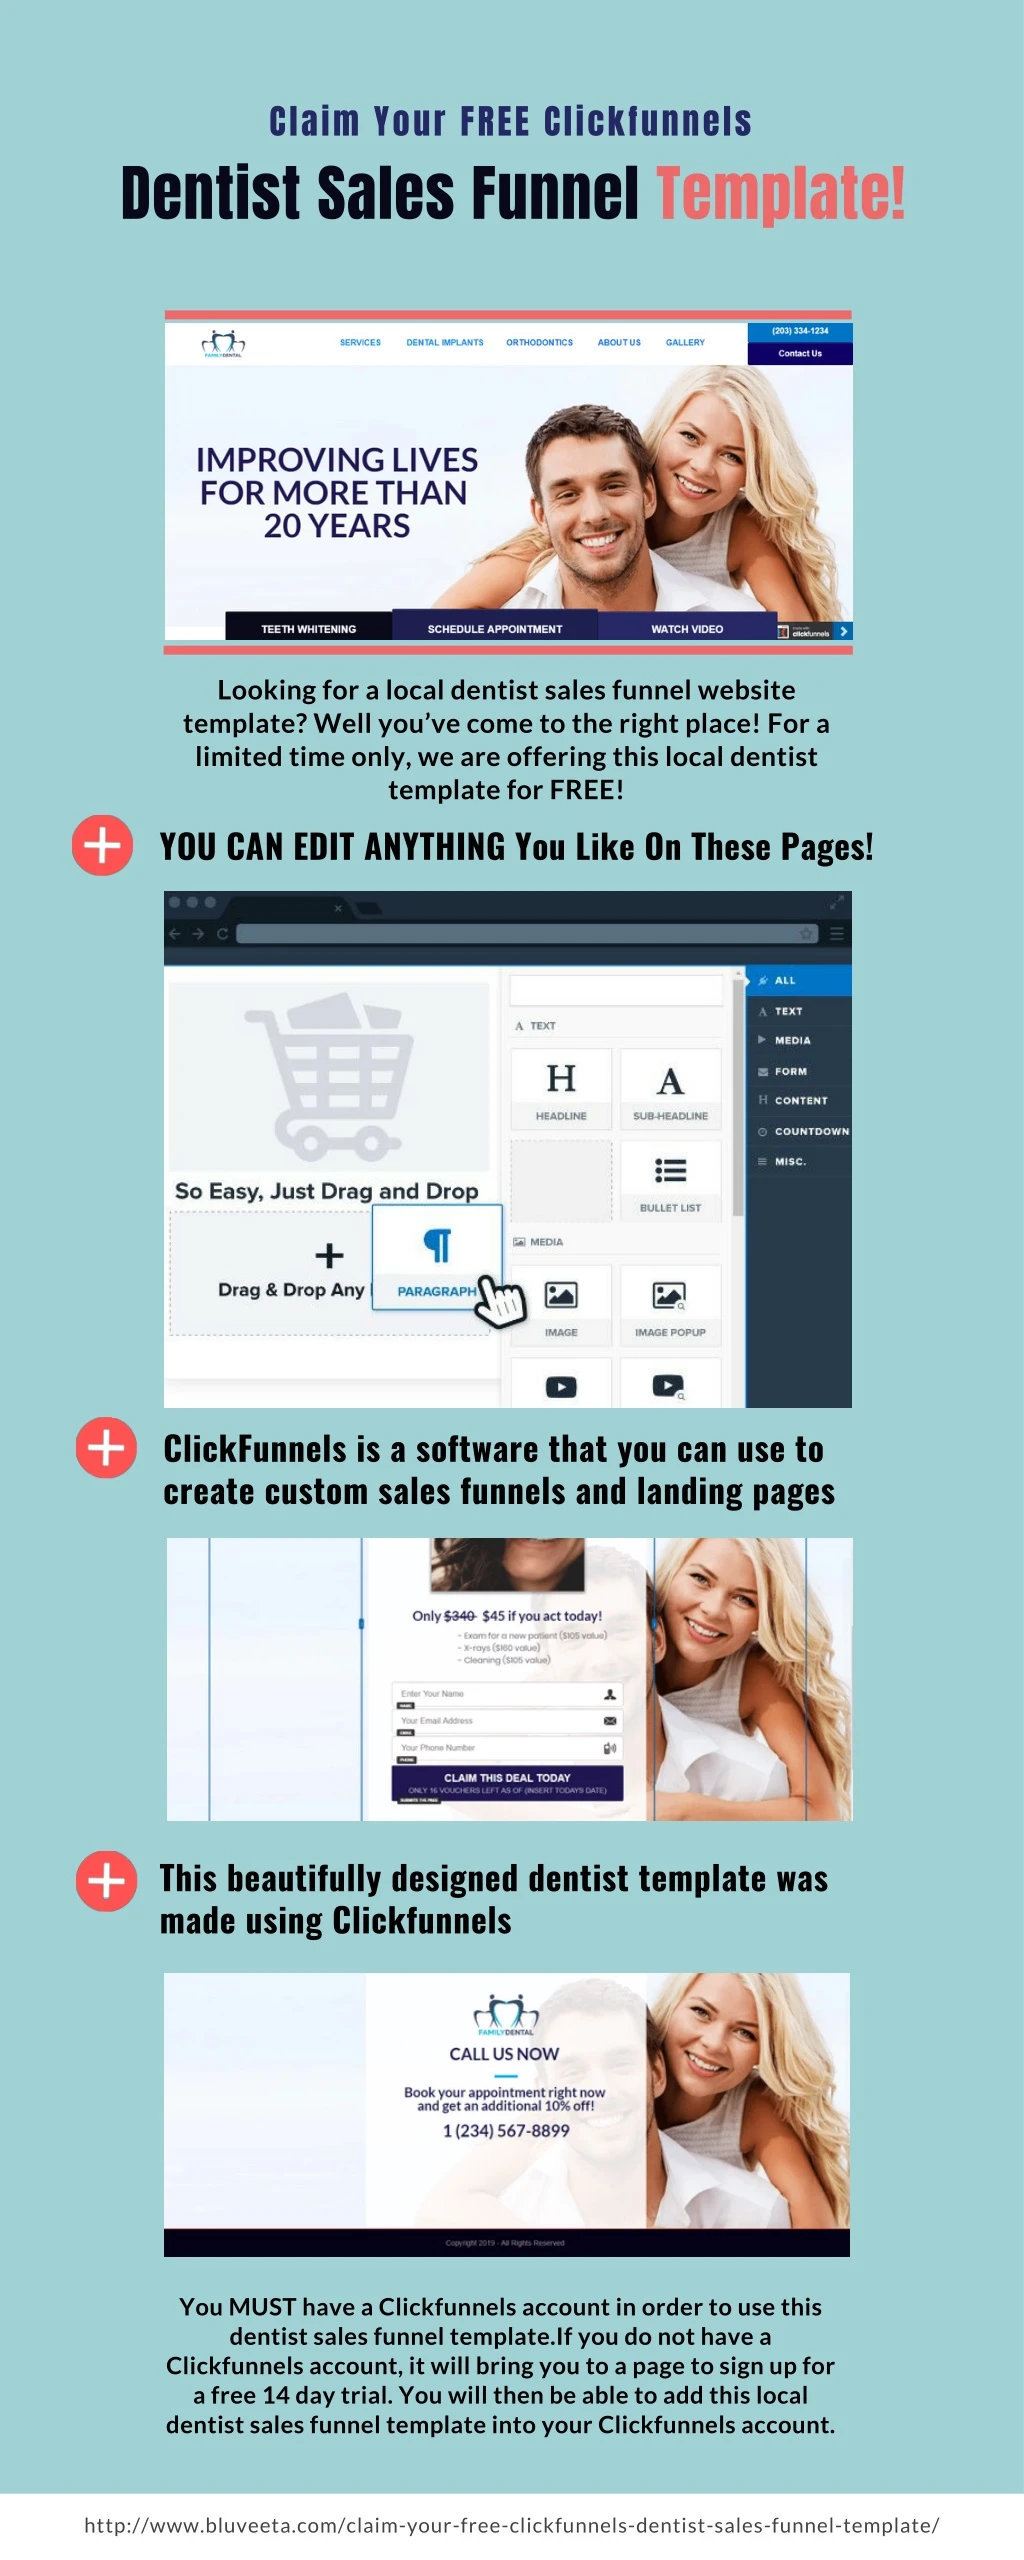 claim your free clickfunnels dentist sales funnel